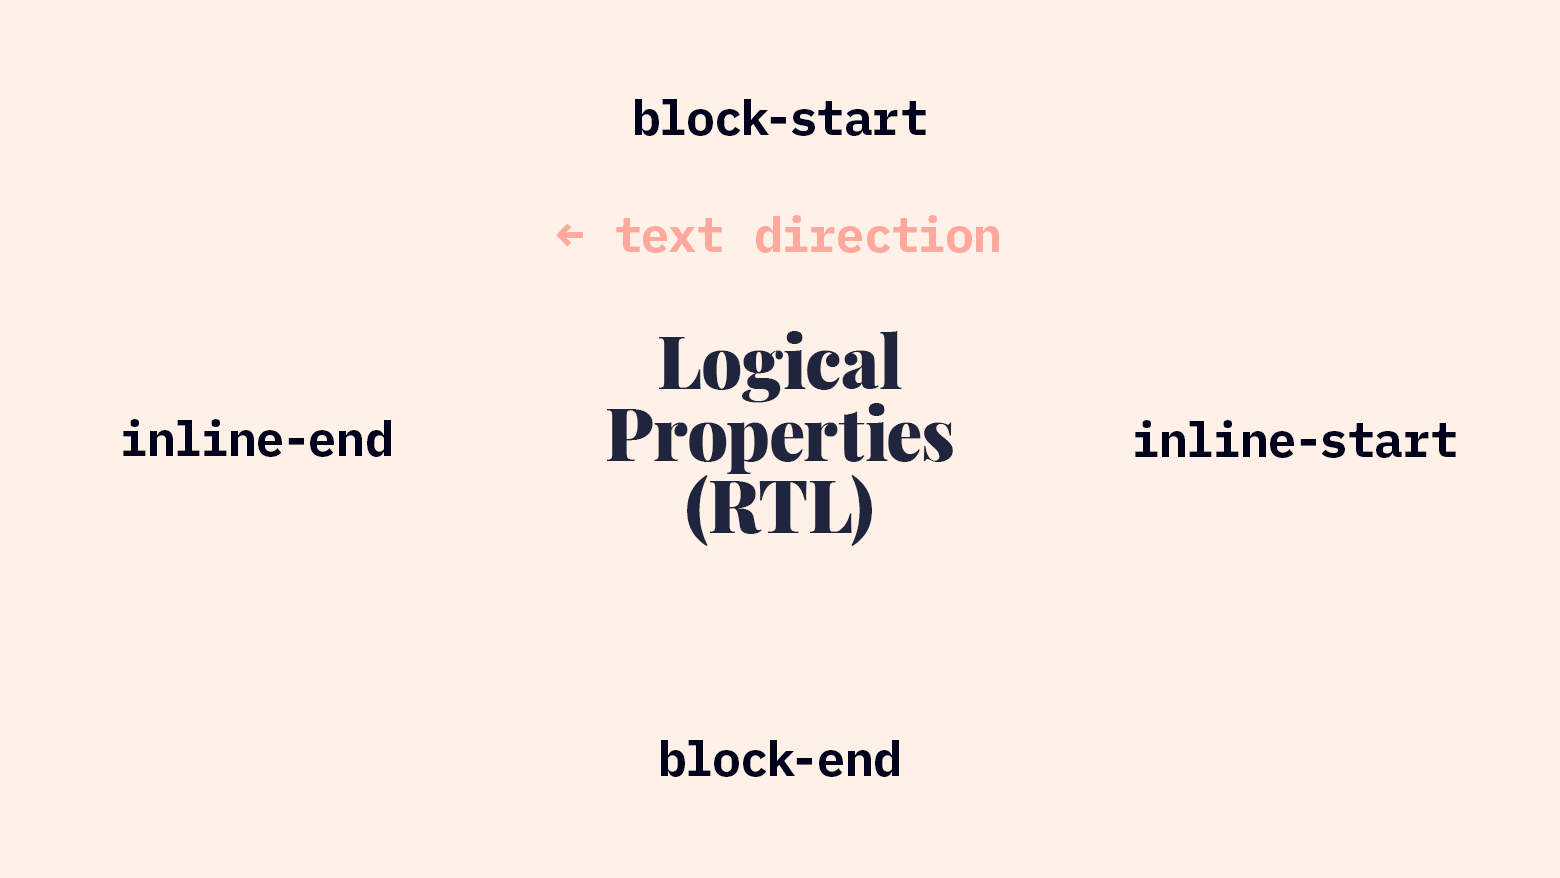 Logical Properties in RTL Writing Mode